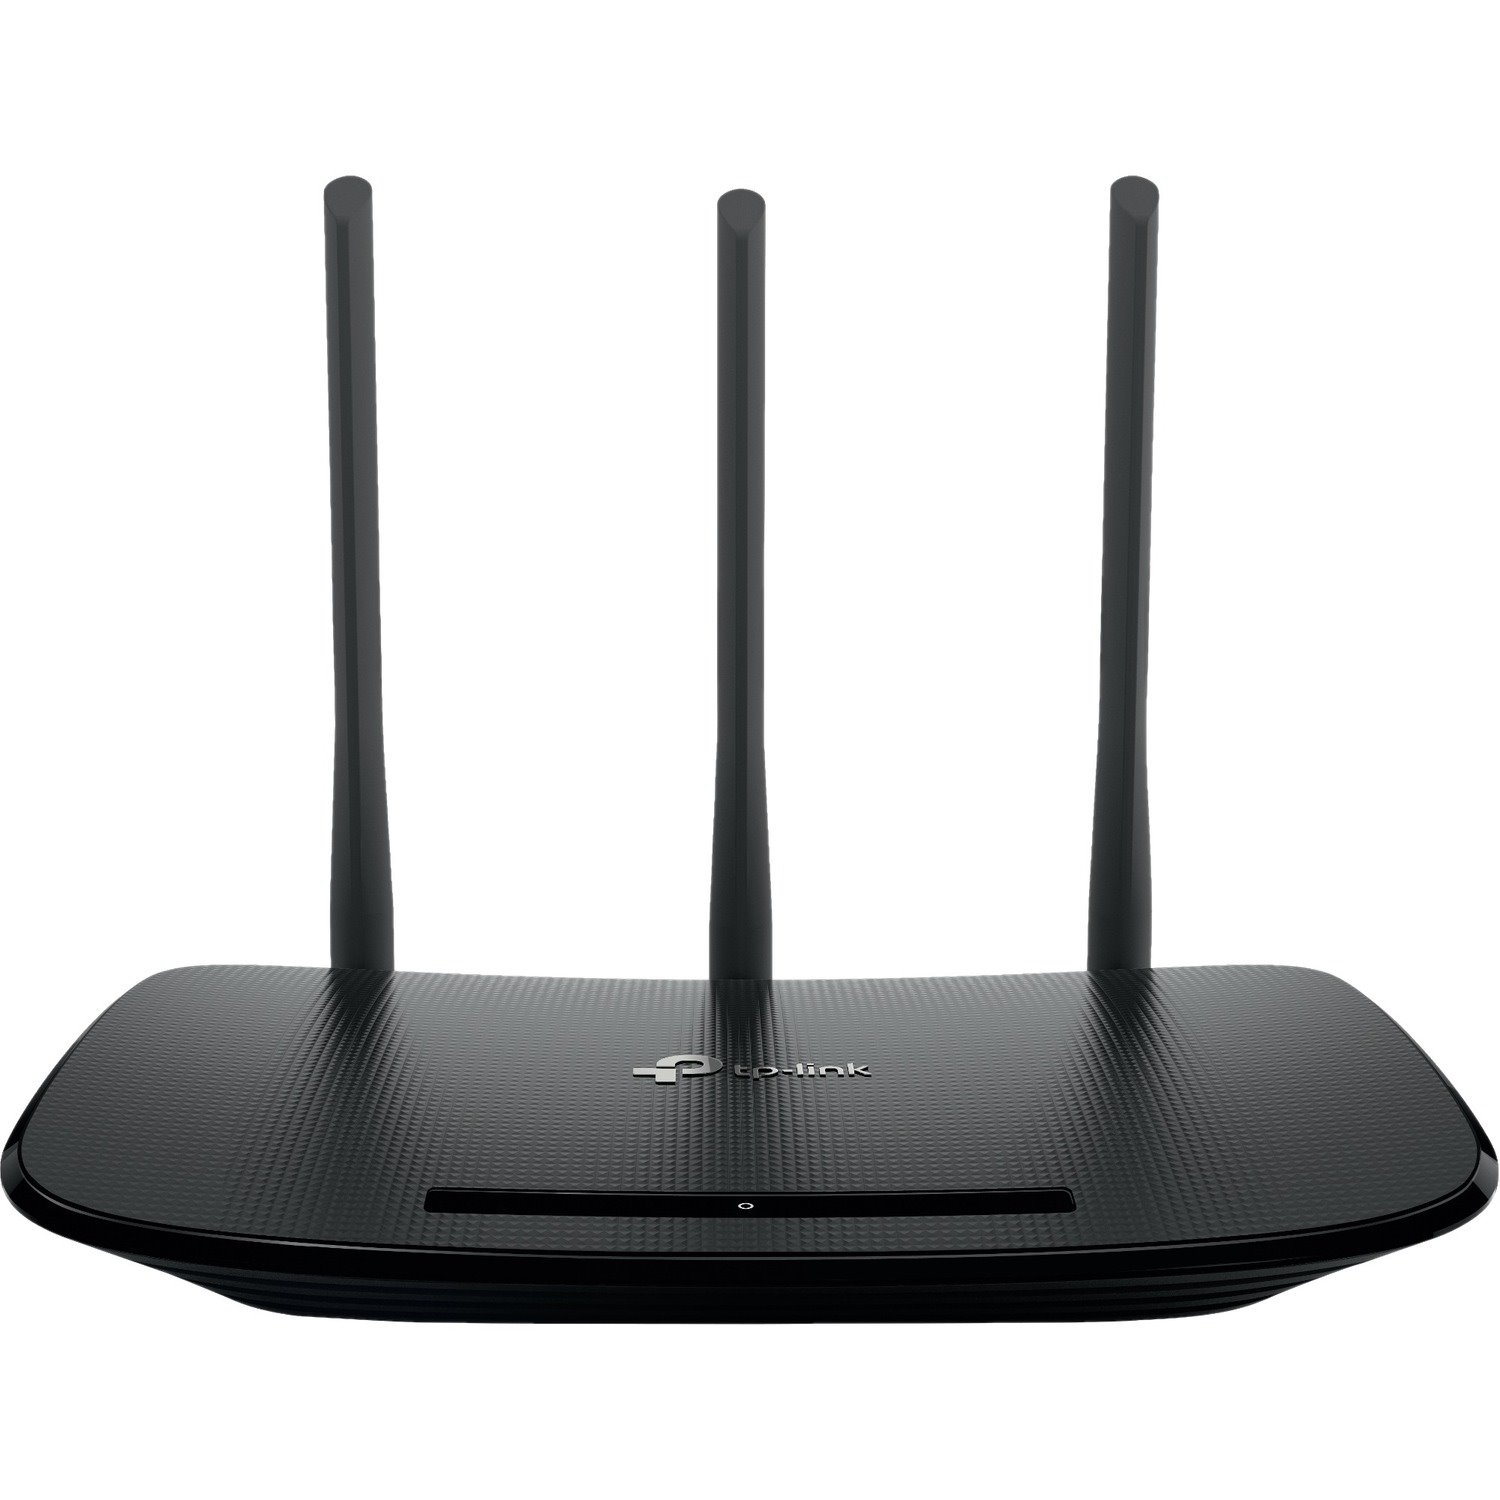 TP-Link TL-WR940N V6 Wi-Fi 4 IEEE 802.11n Ethernet Wireless Router